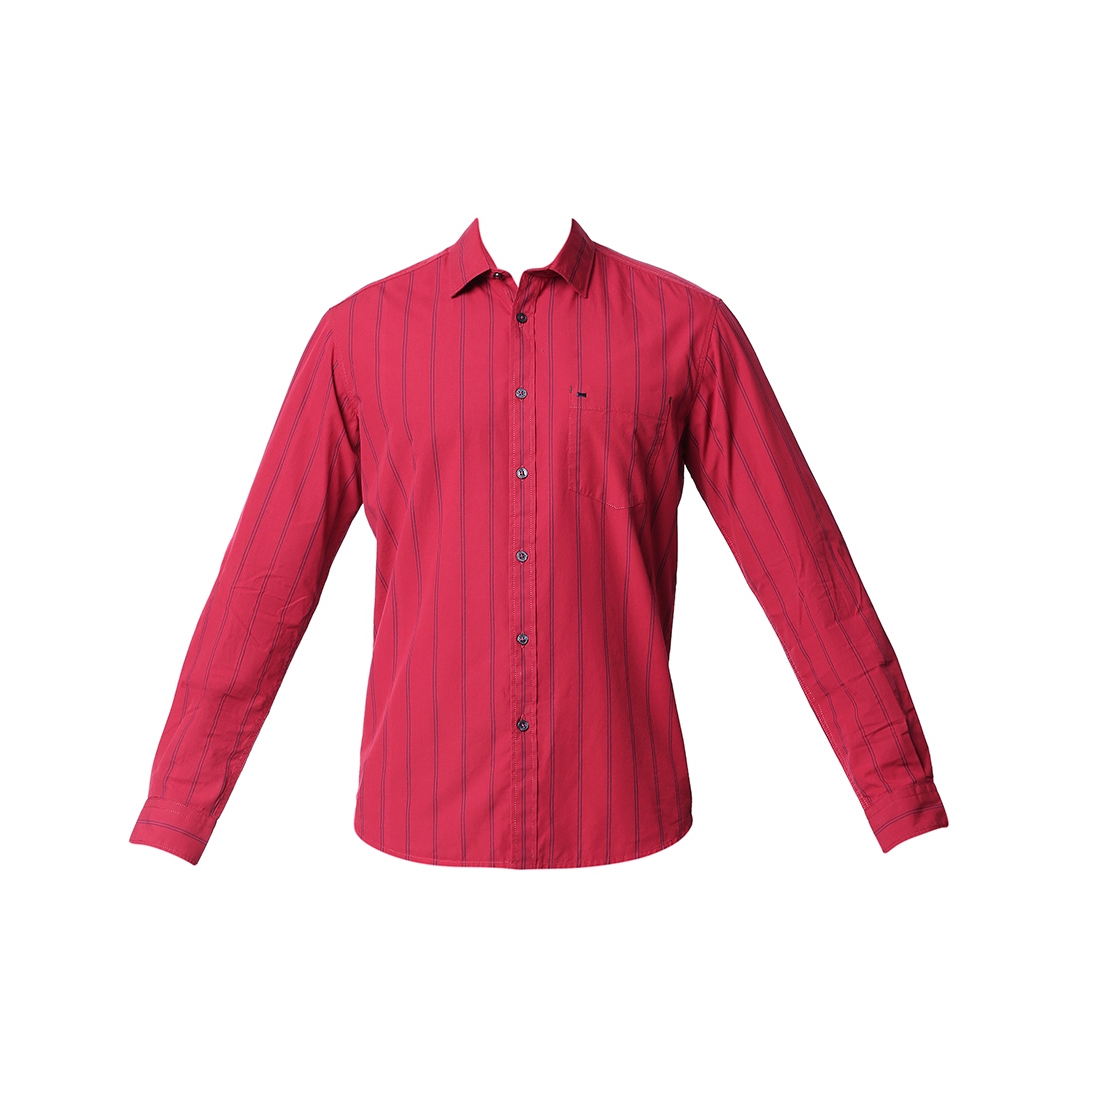 Basics | Men's Red Cotton Striped Casual Shirt 5